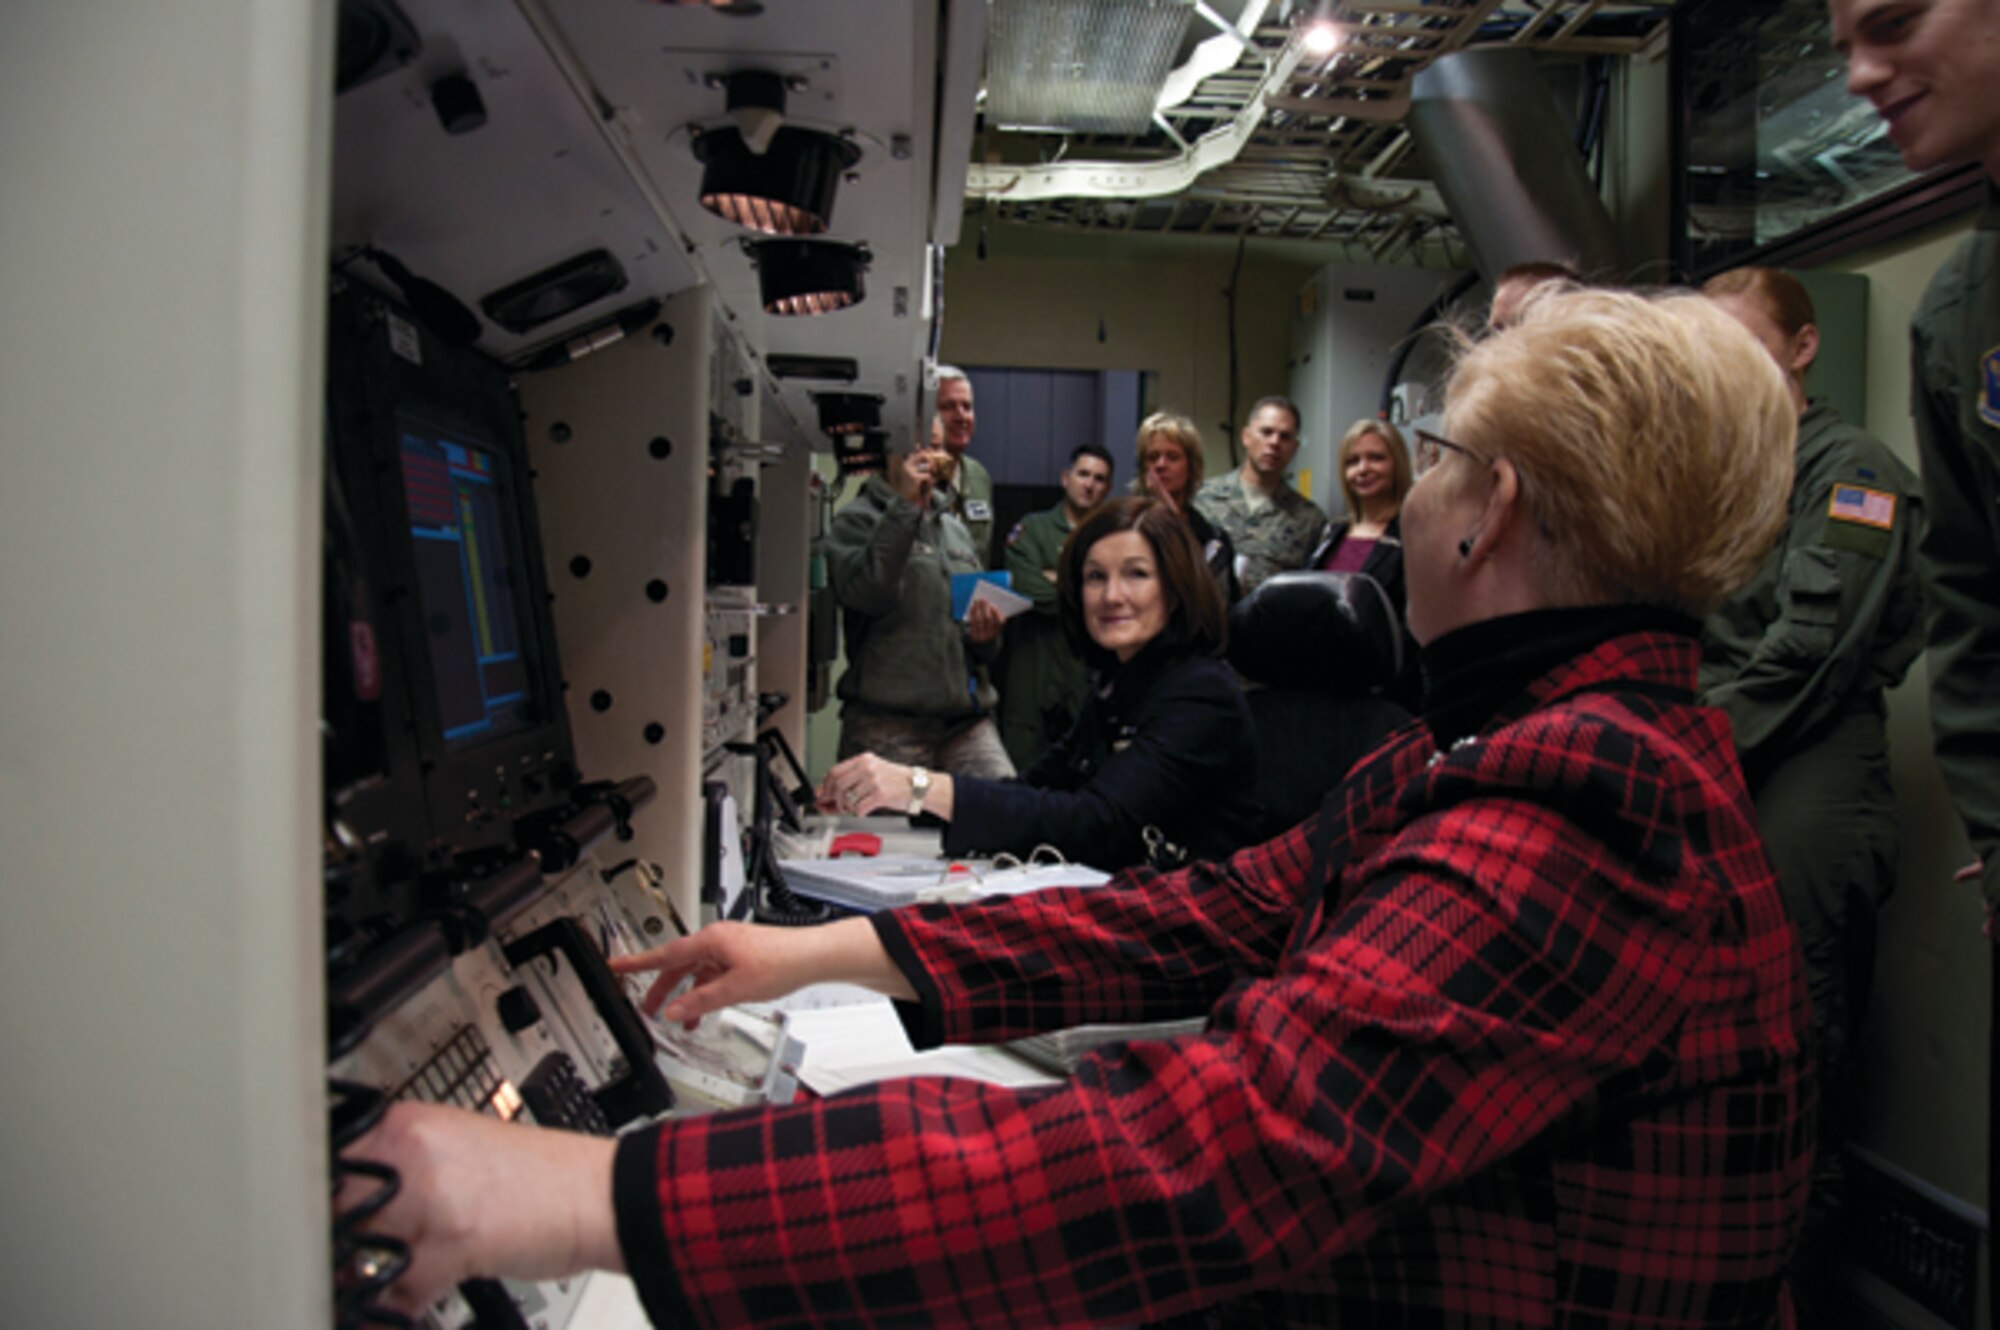 Betty Welsh, wife of Air Force Chief of Staff Gen. Mark A. Welsh III, and Paula Roy, wife of Chief Master Sgt. of the Air Force James Roy, prepare to "turn keys" inside Warren's Missile Procedures Trainer during their visit to F. E. Warren Air Force Base, Wyo., Nov. 19. (U.S. Air Force photo by Airman 1st Class Jason Wiese)